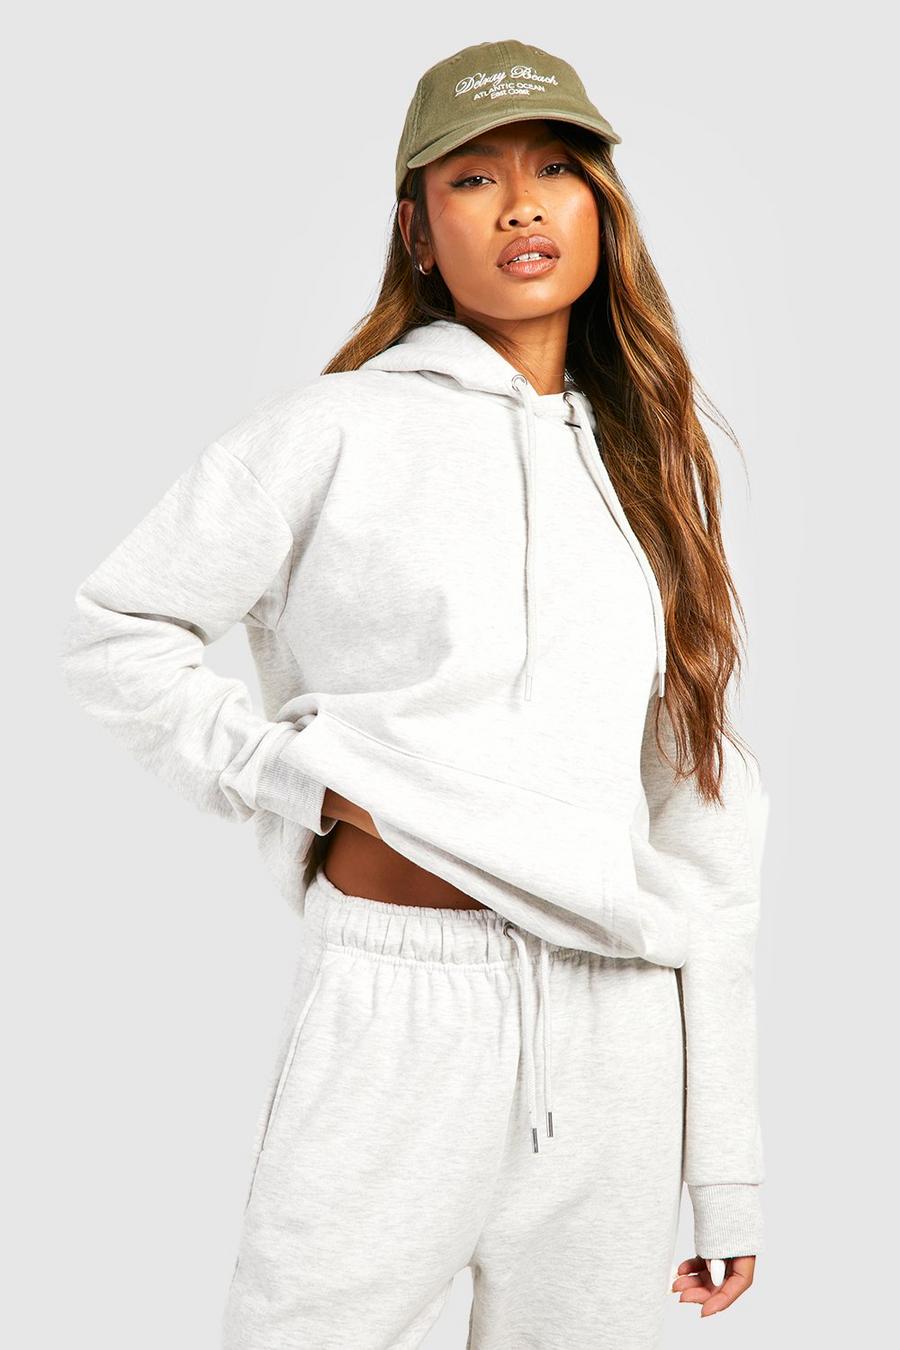 Womens Fall Outfits Hoodies Long Sleeve Sweatshirt Past Orders 2023,Coupons  And Promo Codes For Prime Discount,Sweatshirt Under 20 Dollars For  Women,Cheap Cute Stuff Under 5 Dollars,Teacher 2023 Deals : Clothing, Shoes  & Jewelry 